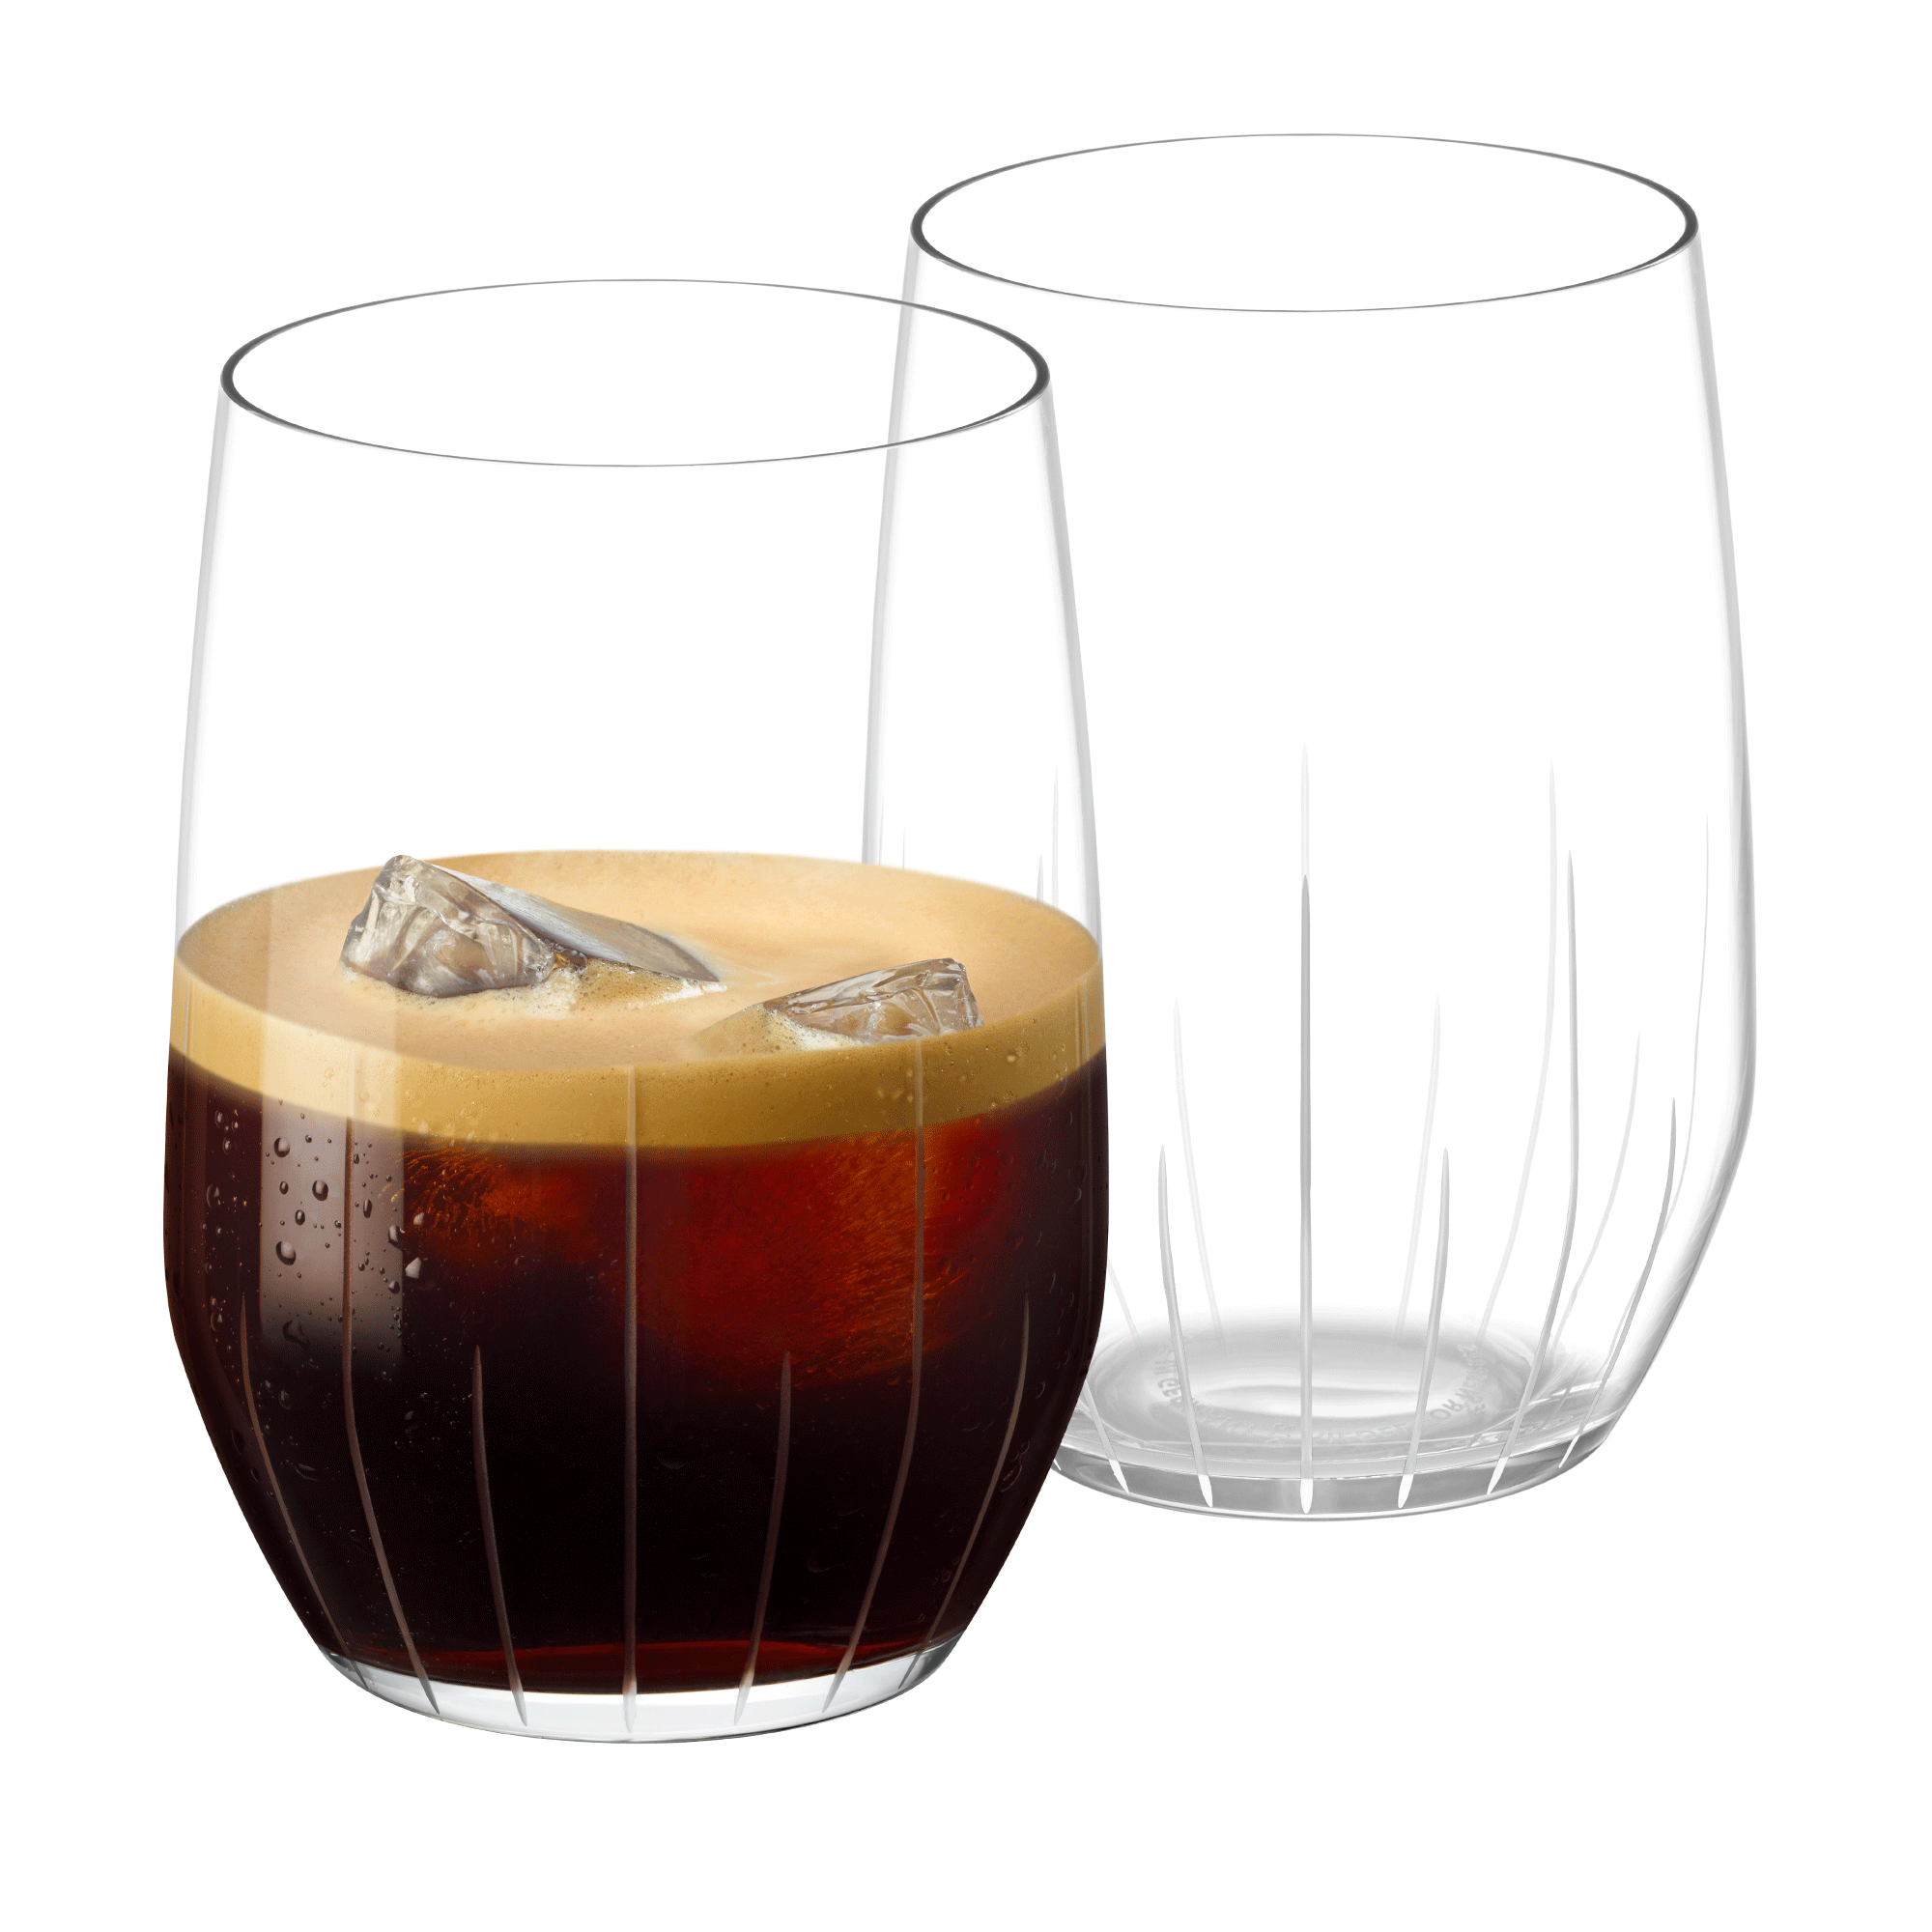 REVEAL Cold Coffee Glasses x 2 (550ml)